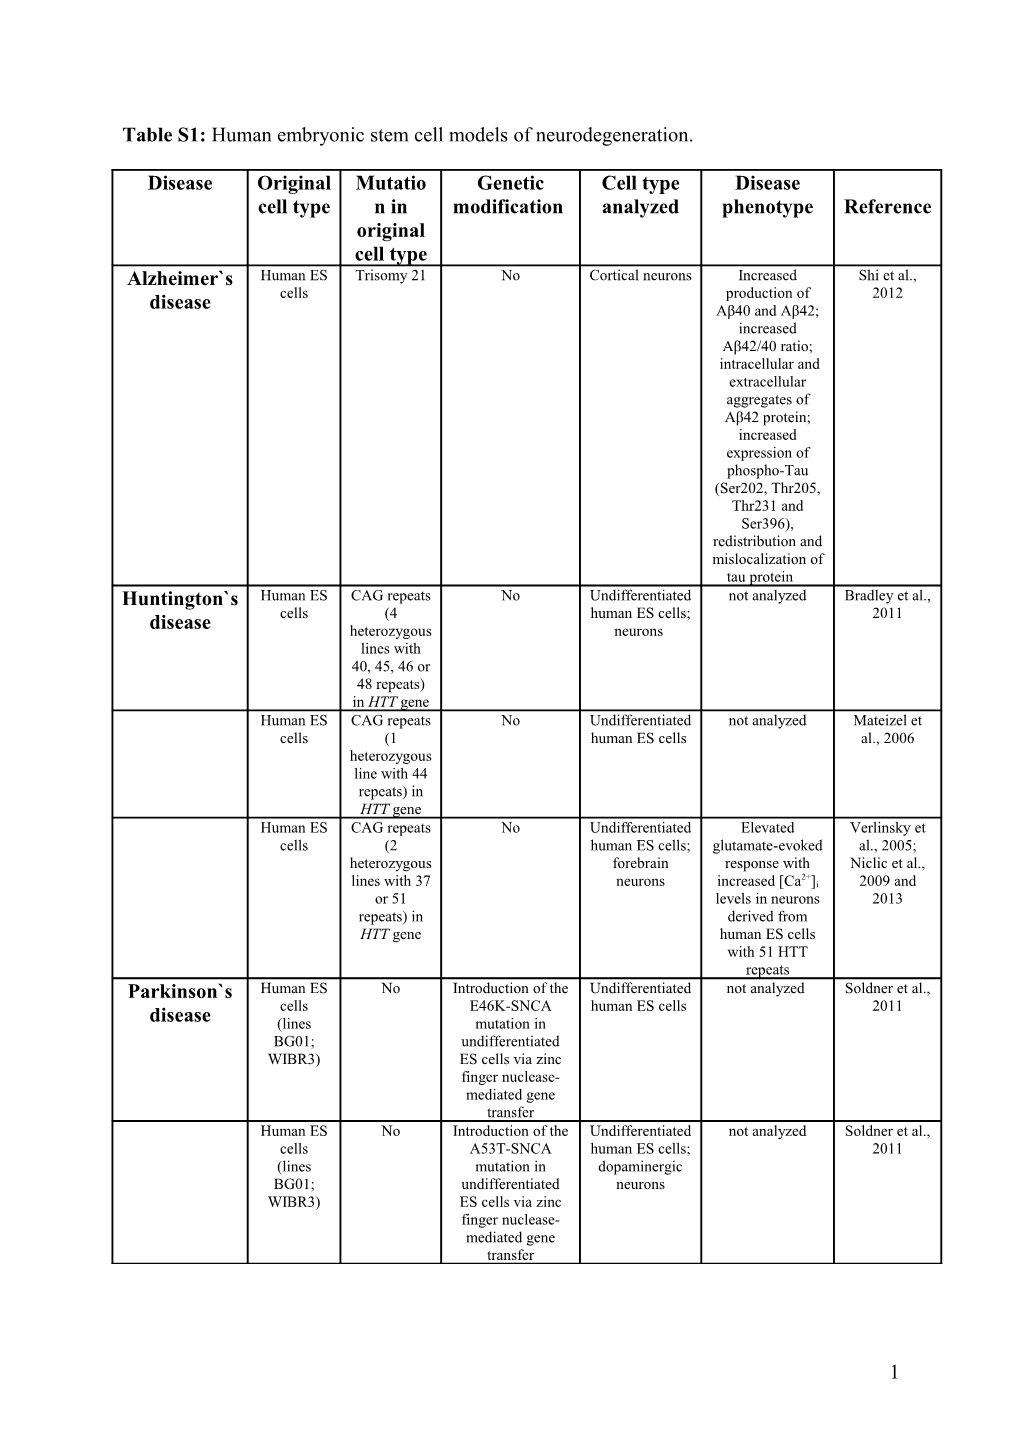 Table S1: Human Embryonic Stem Cell Models of Neurodegeneration